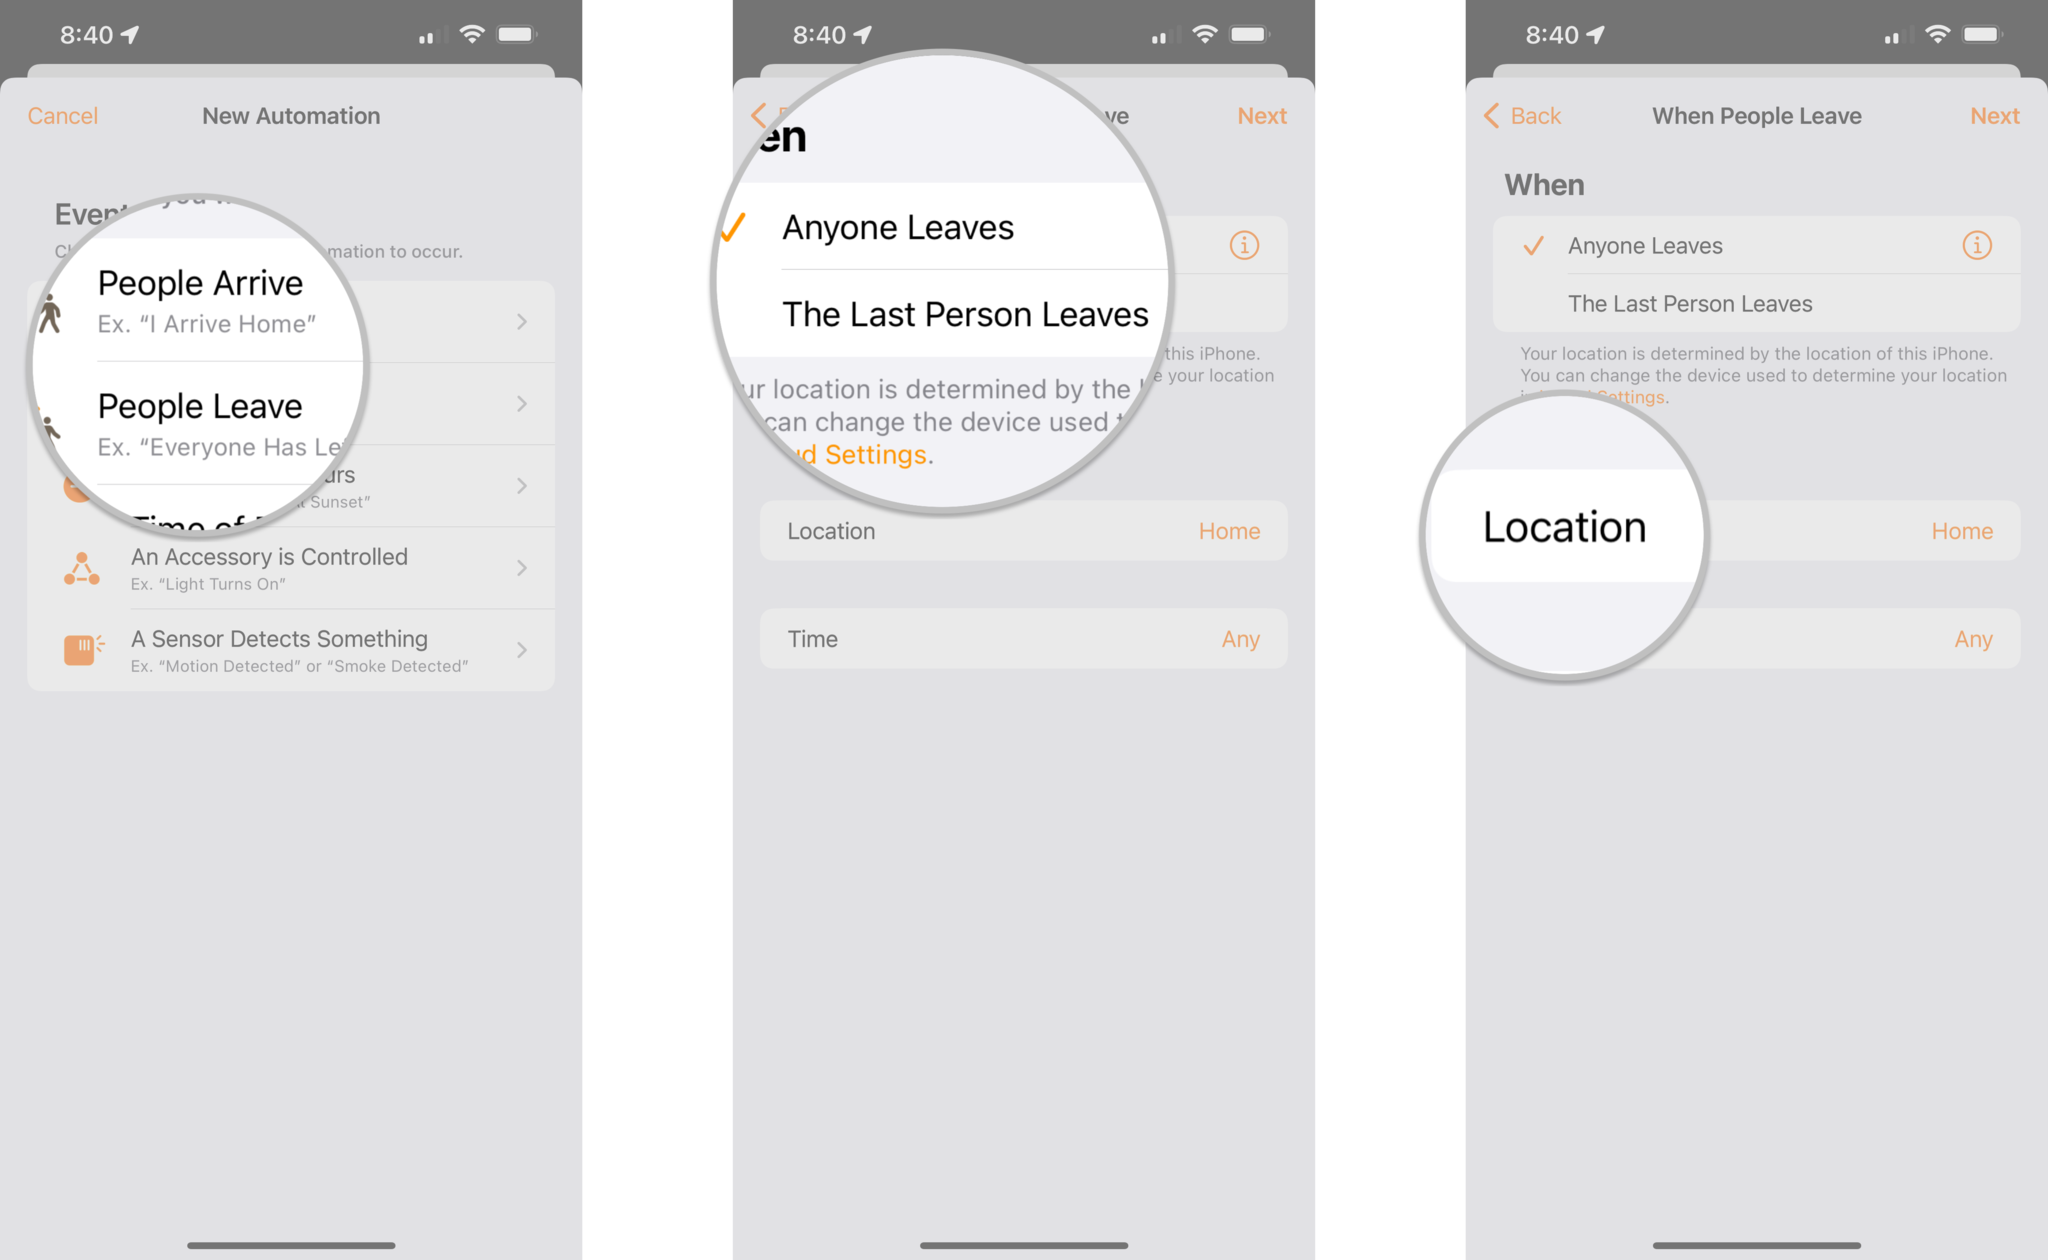 How to create a location automation in the Home app on the iPhone by showing steps: Tap either People Arrive or People Leave, Select When the automation will occur with a tap, Tap Location to set a desired location